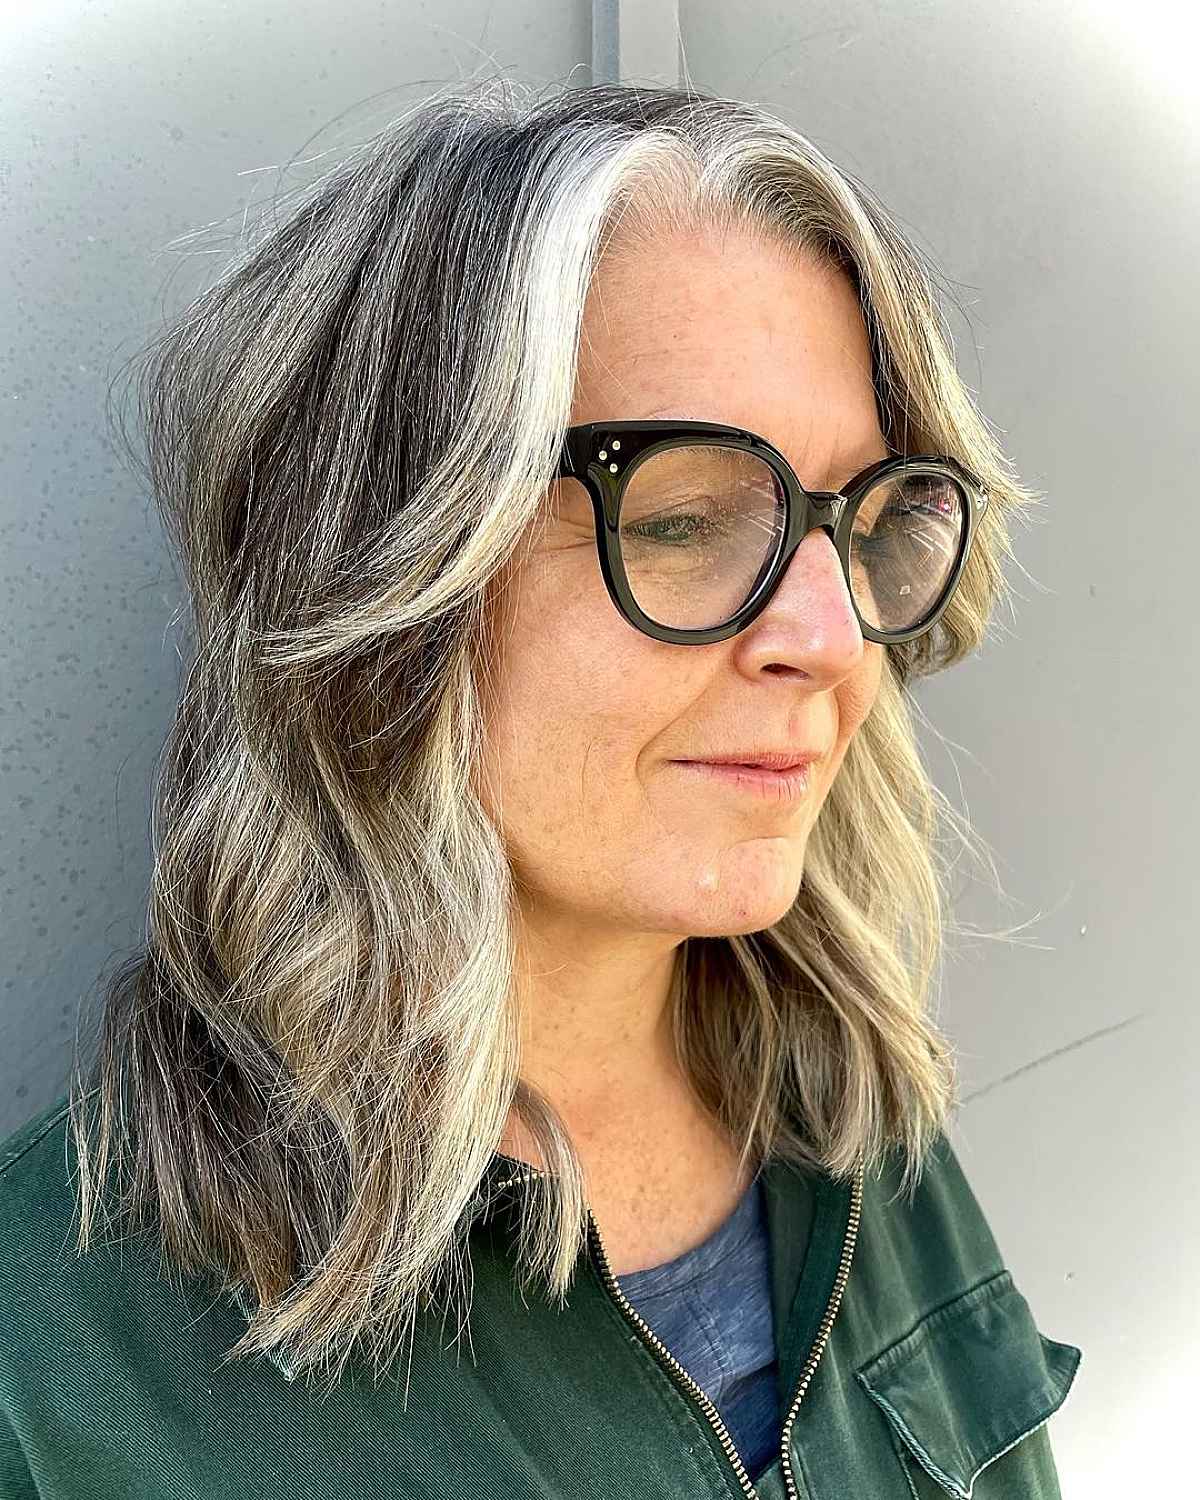 Longer Shaggy Bob for Women Past Sixty with Glasses